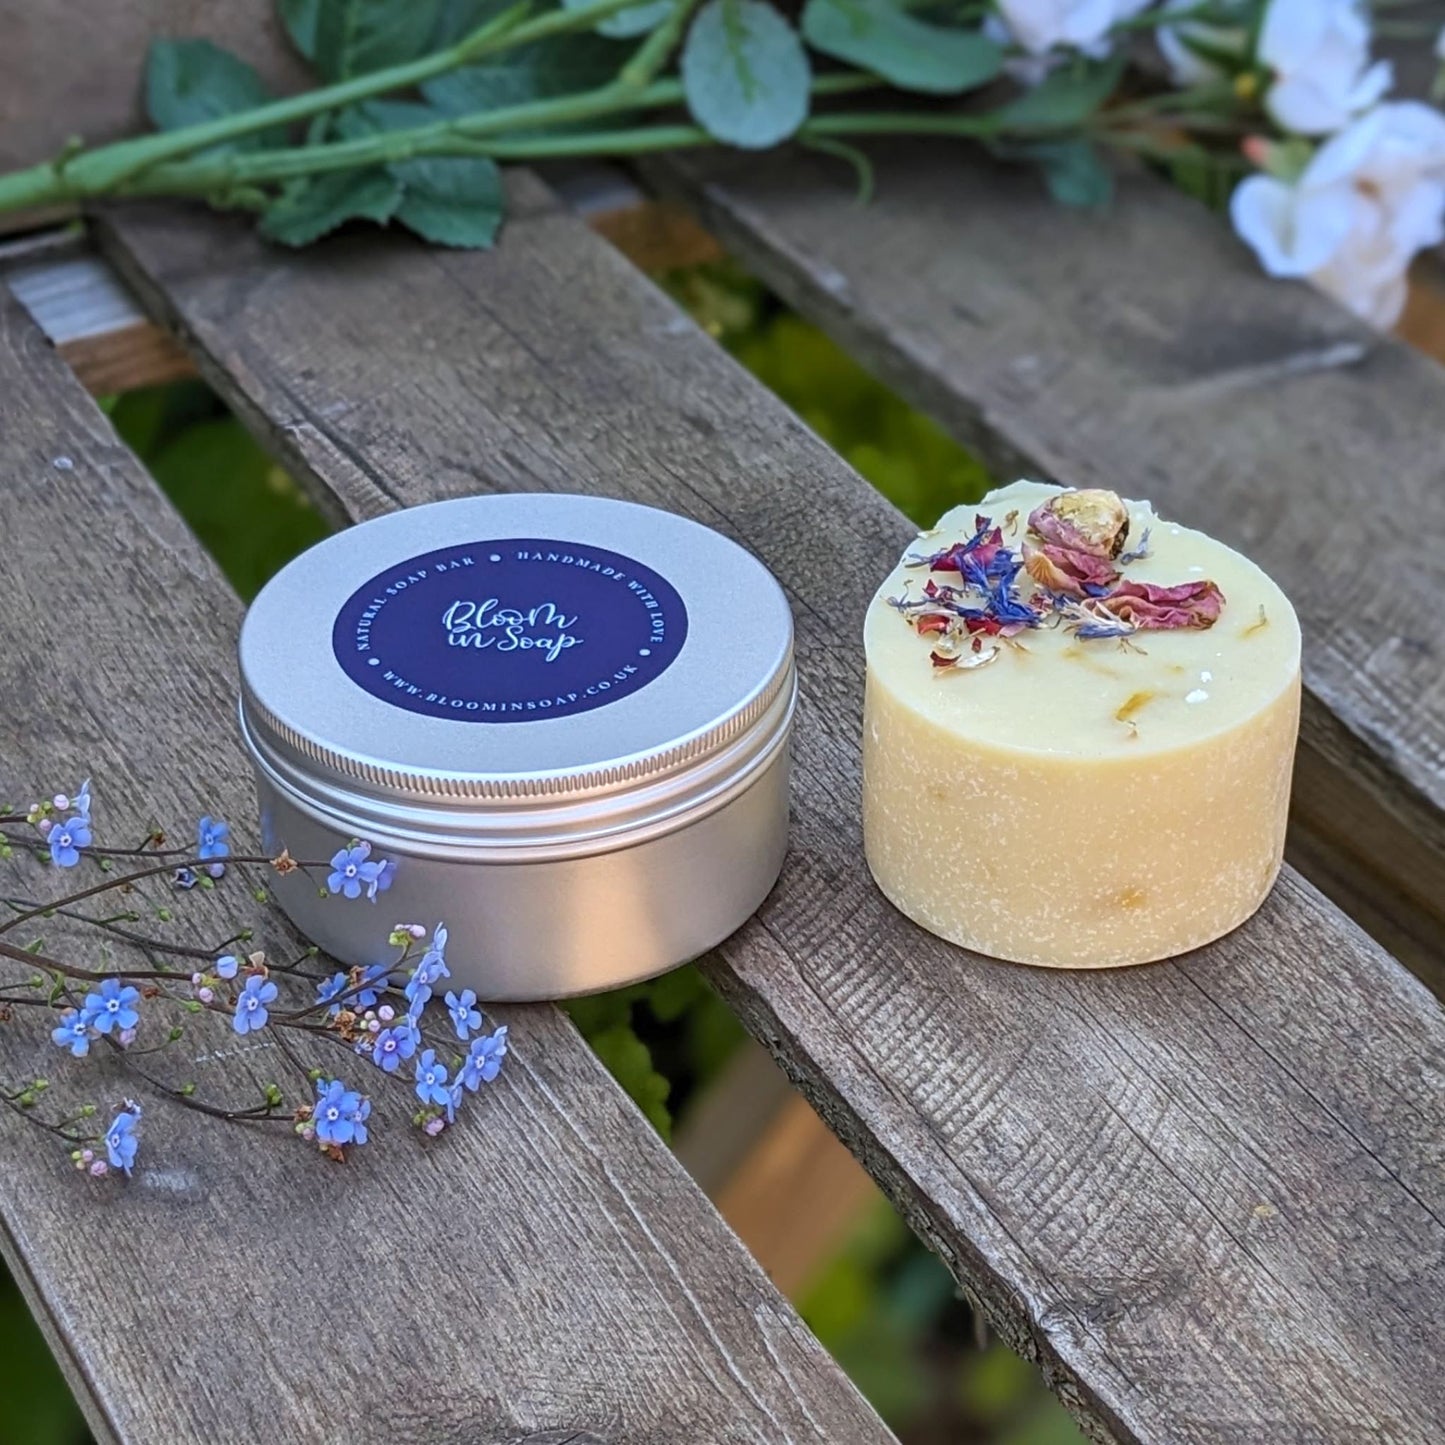 Wildflower Meadow travel soap in a tin